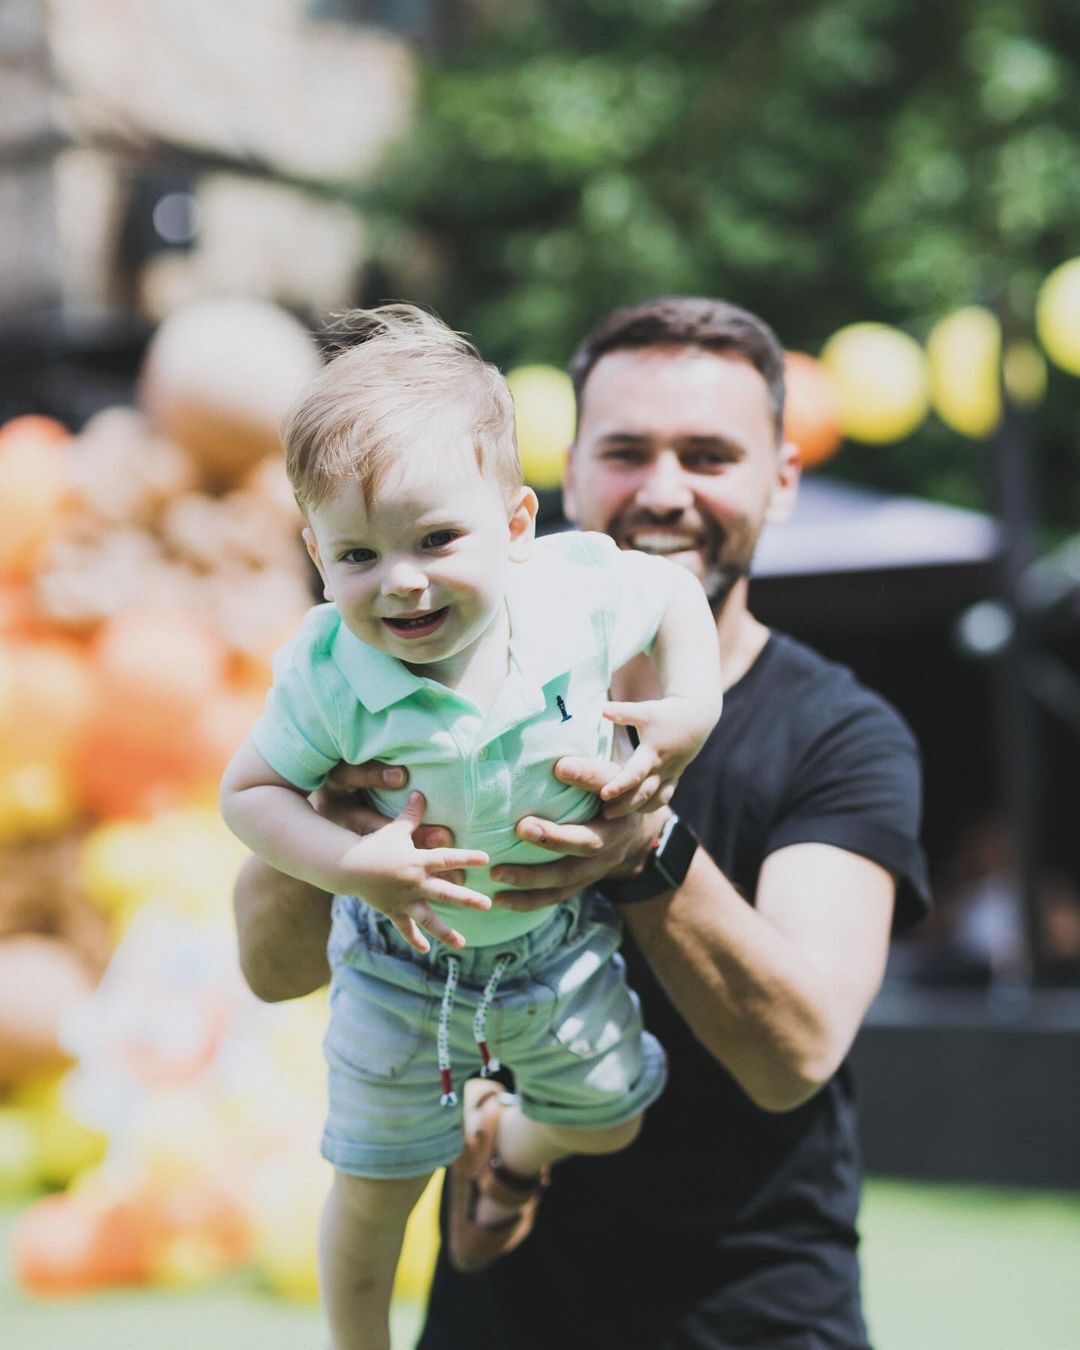 ''Everything in my life is revolving around them'': 5 Ukrainian star dads to look up to